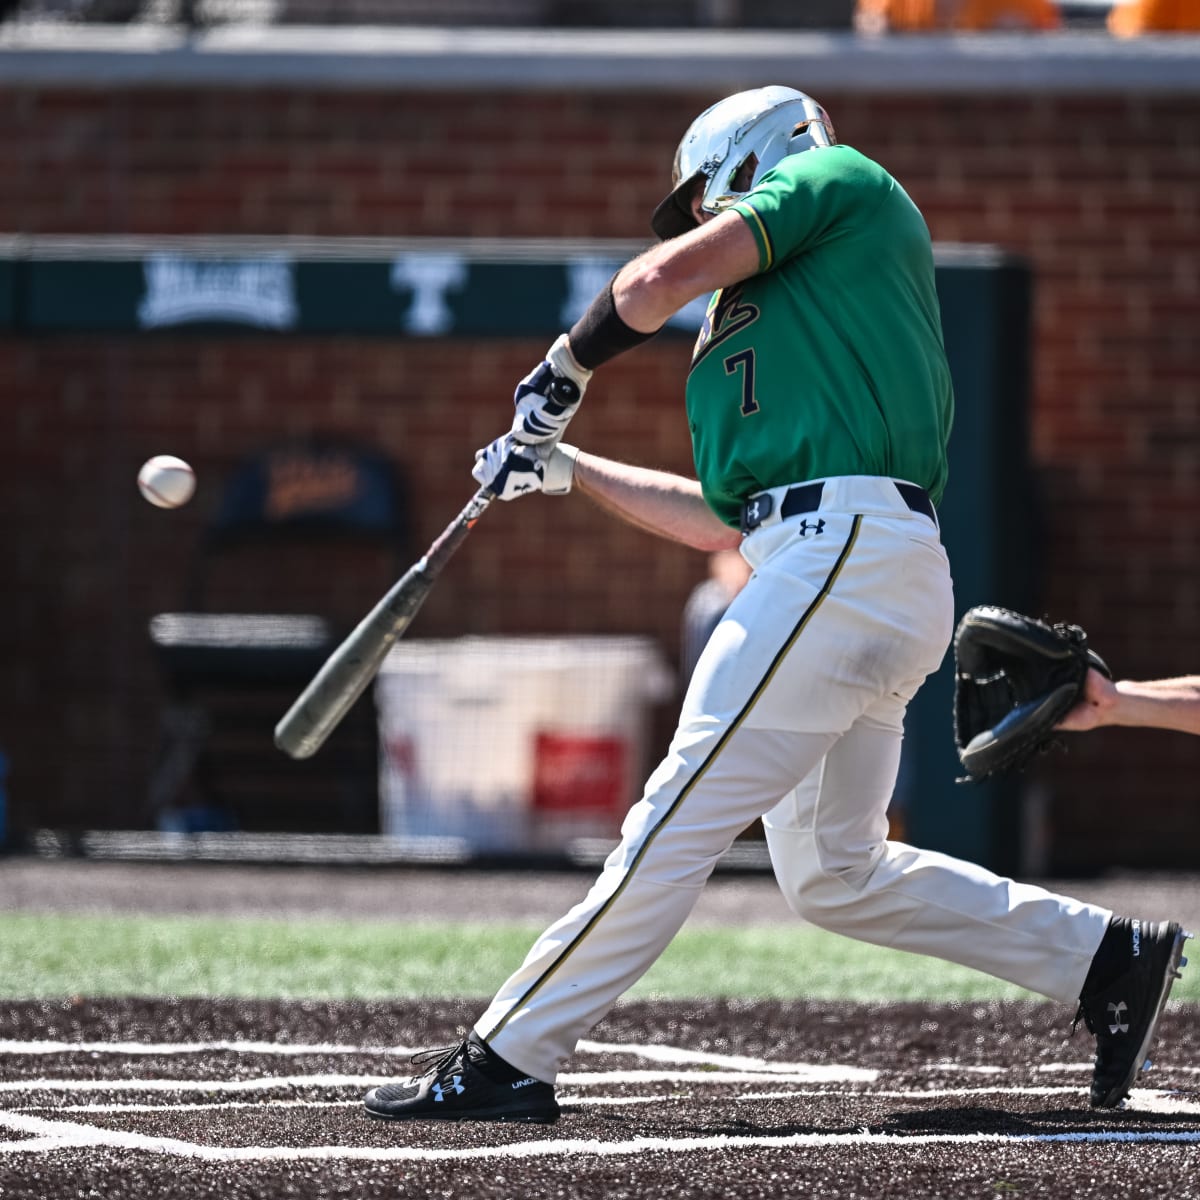 Gallery: Notre Dame defeats Tennessee in the NCAA Baseball Super